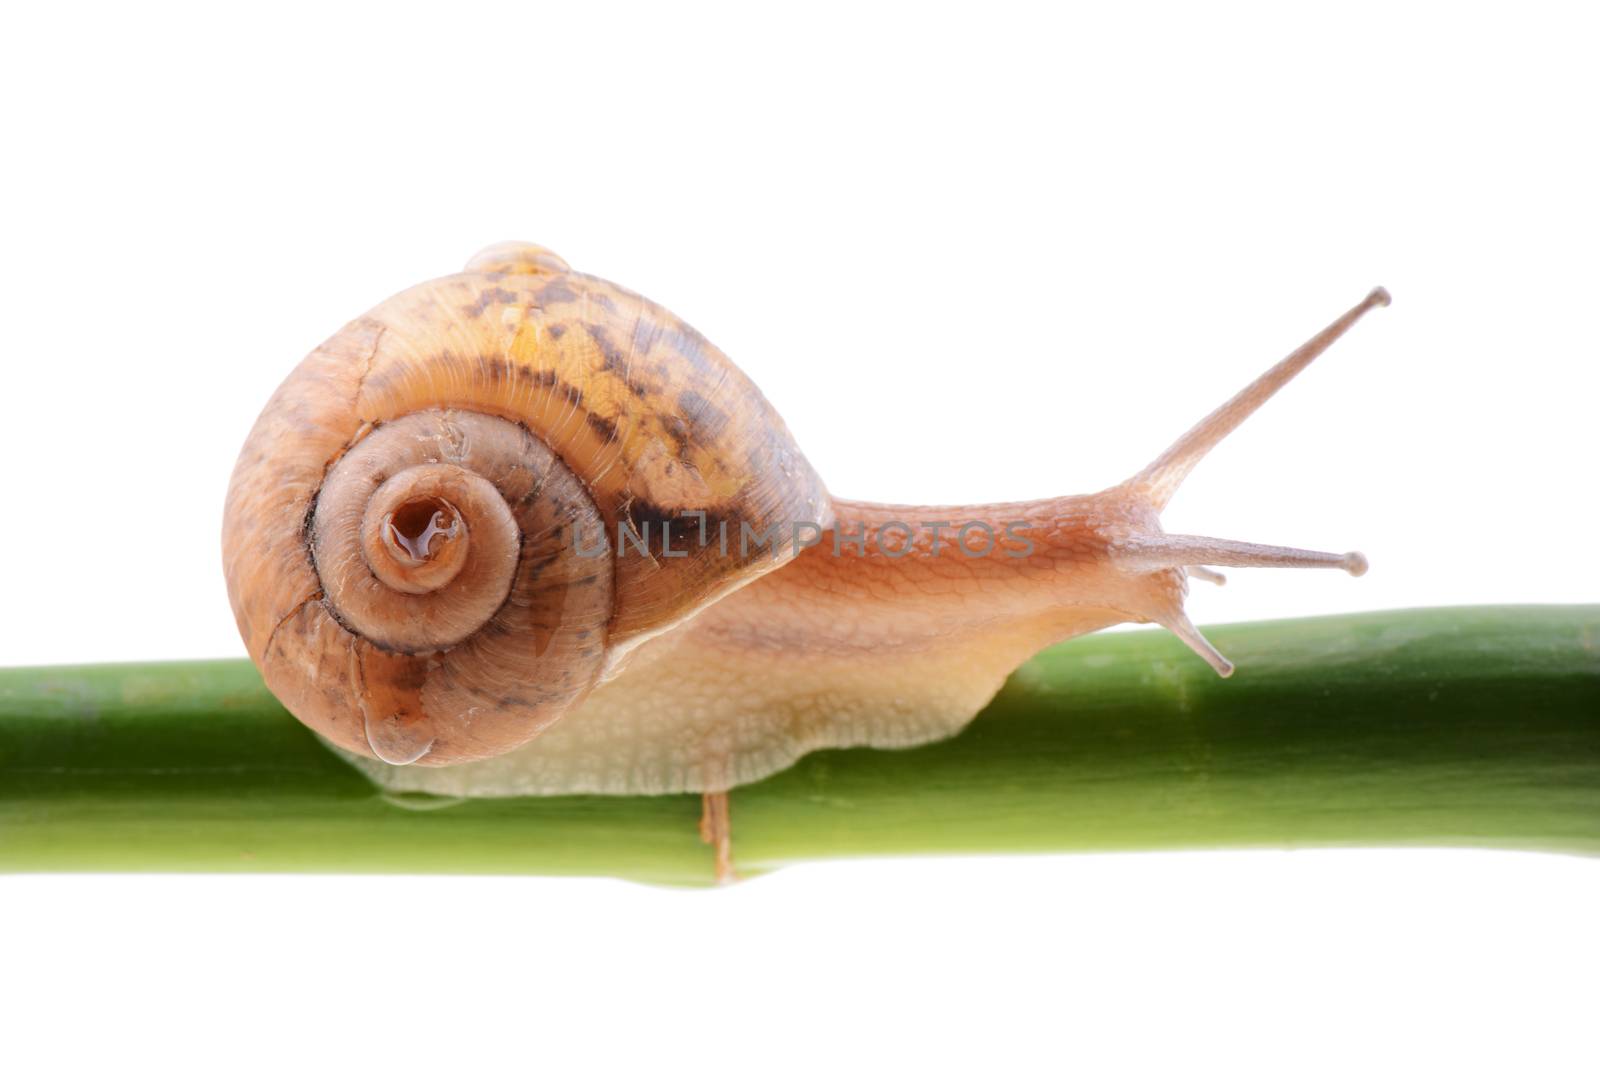 Small brown snail on a green bamboo stem